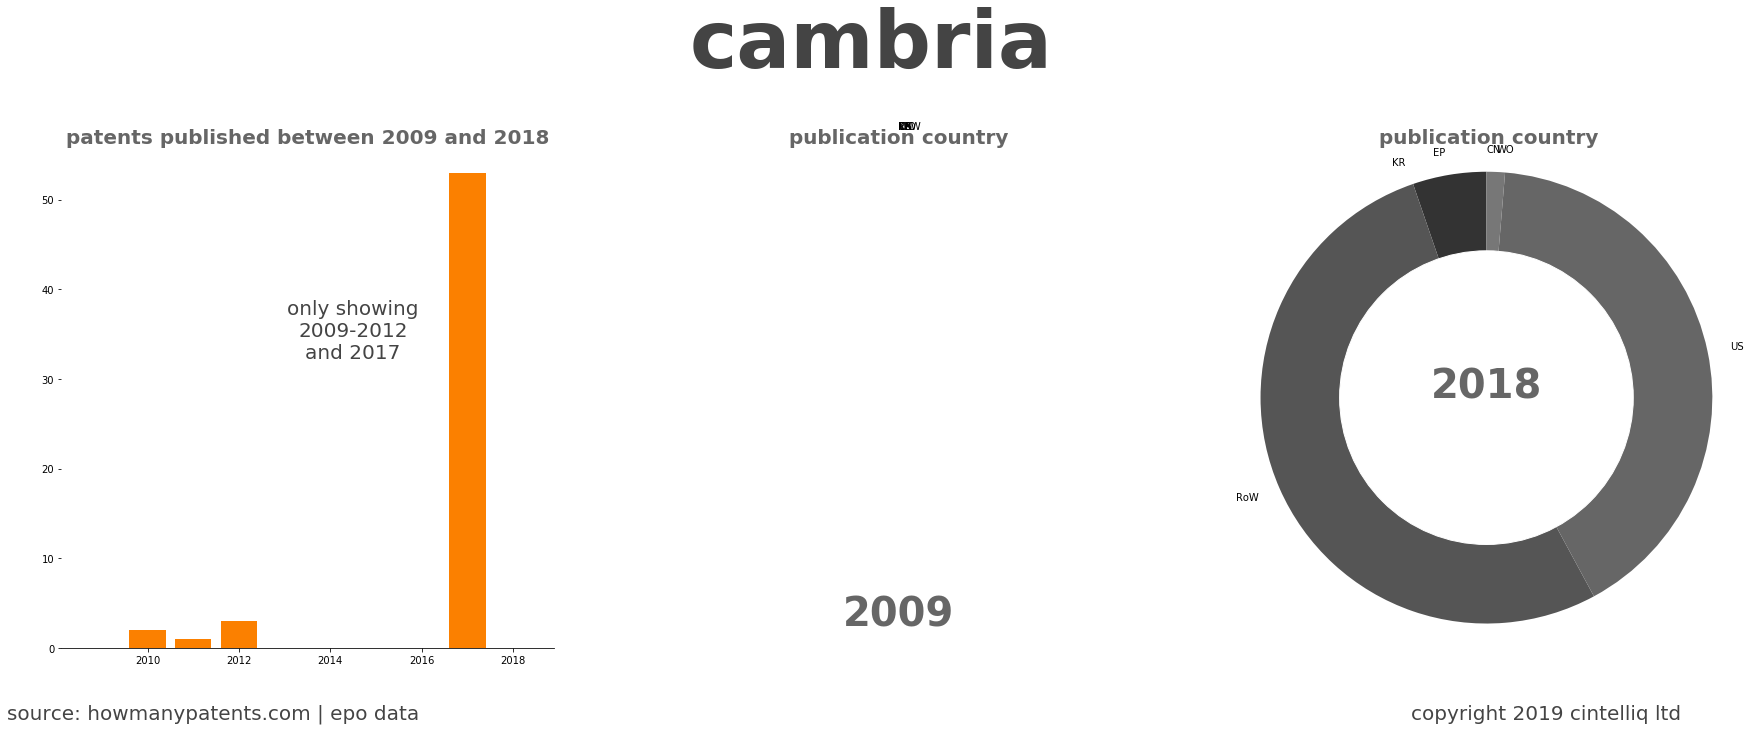 summary of patents for Cambria